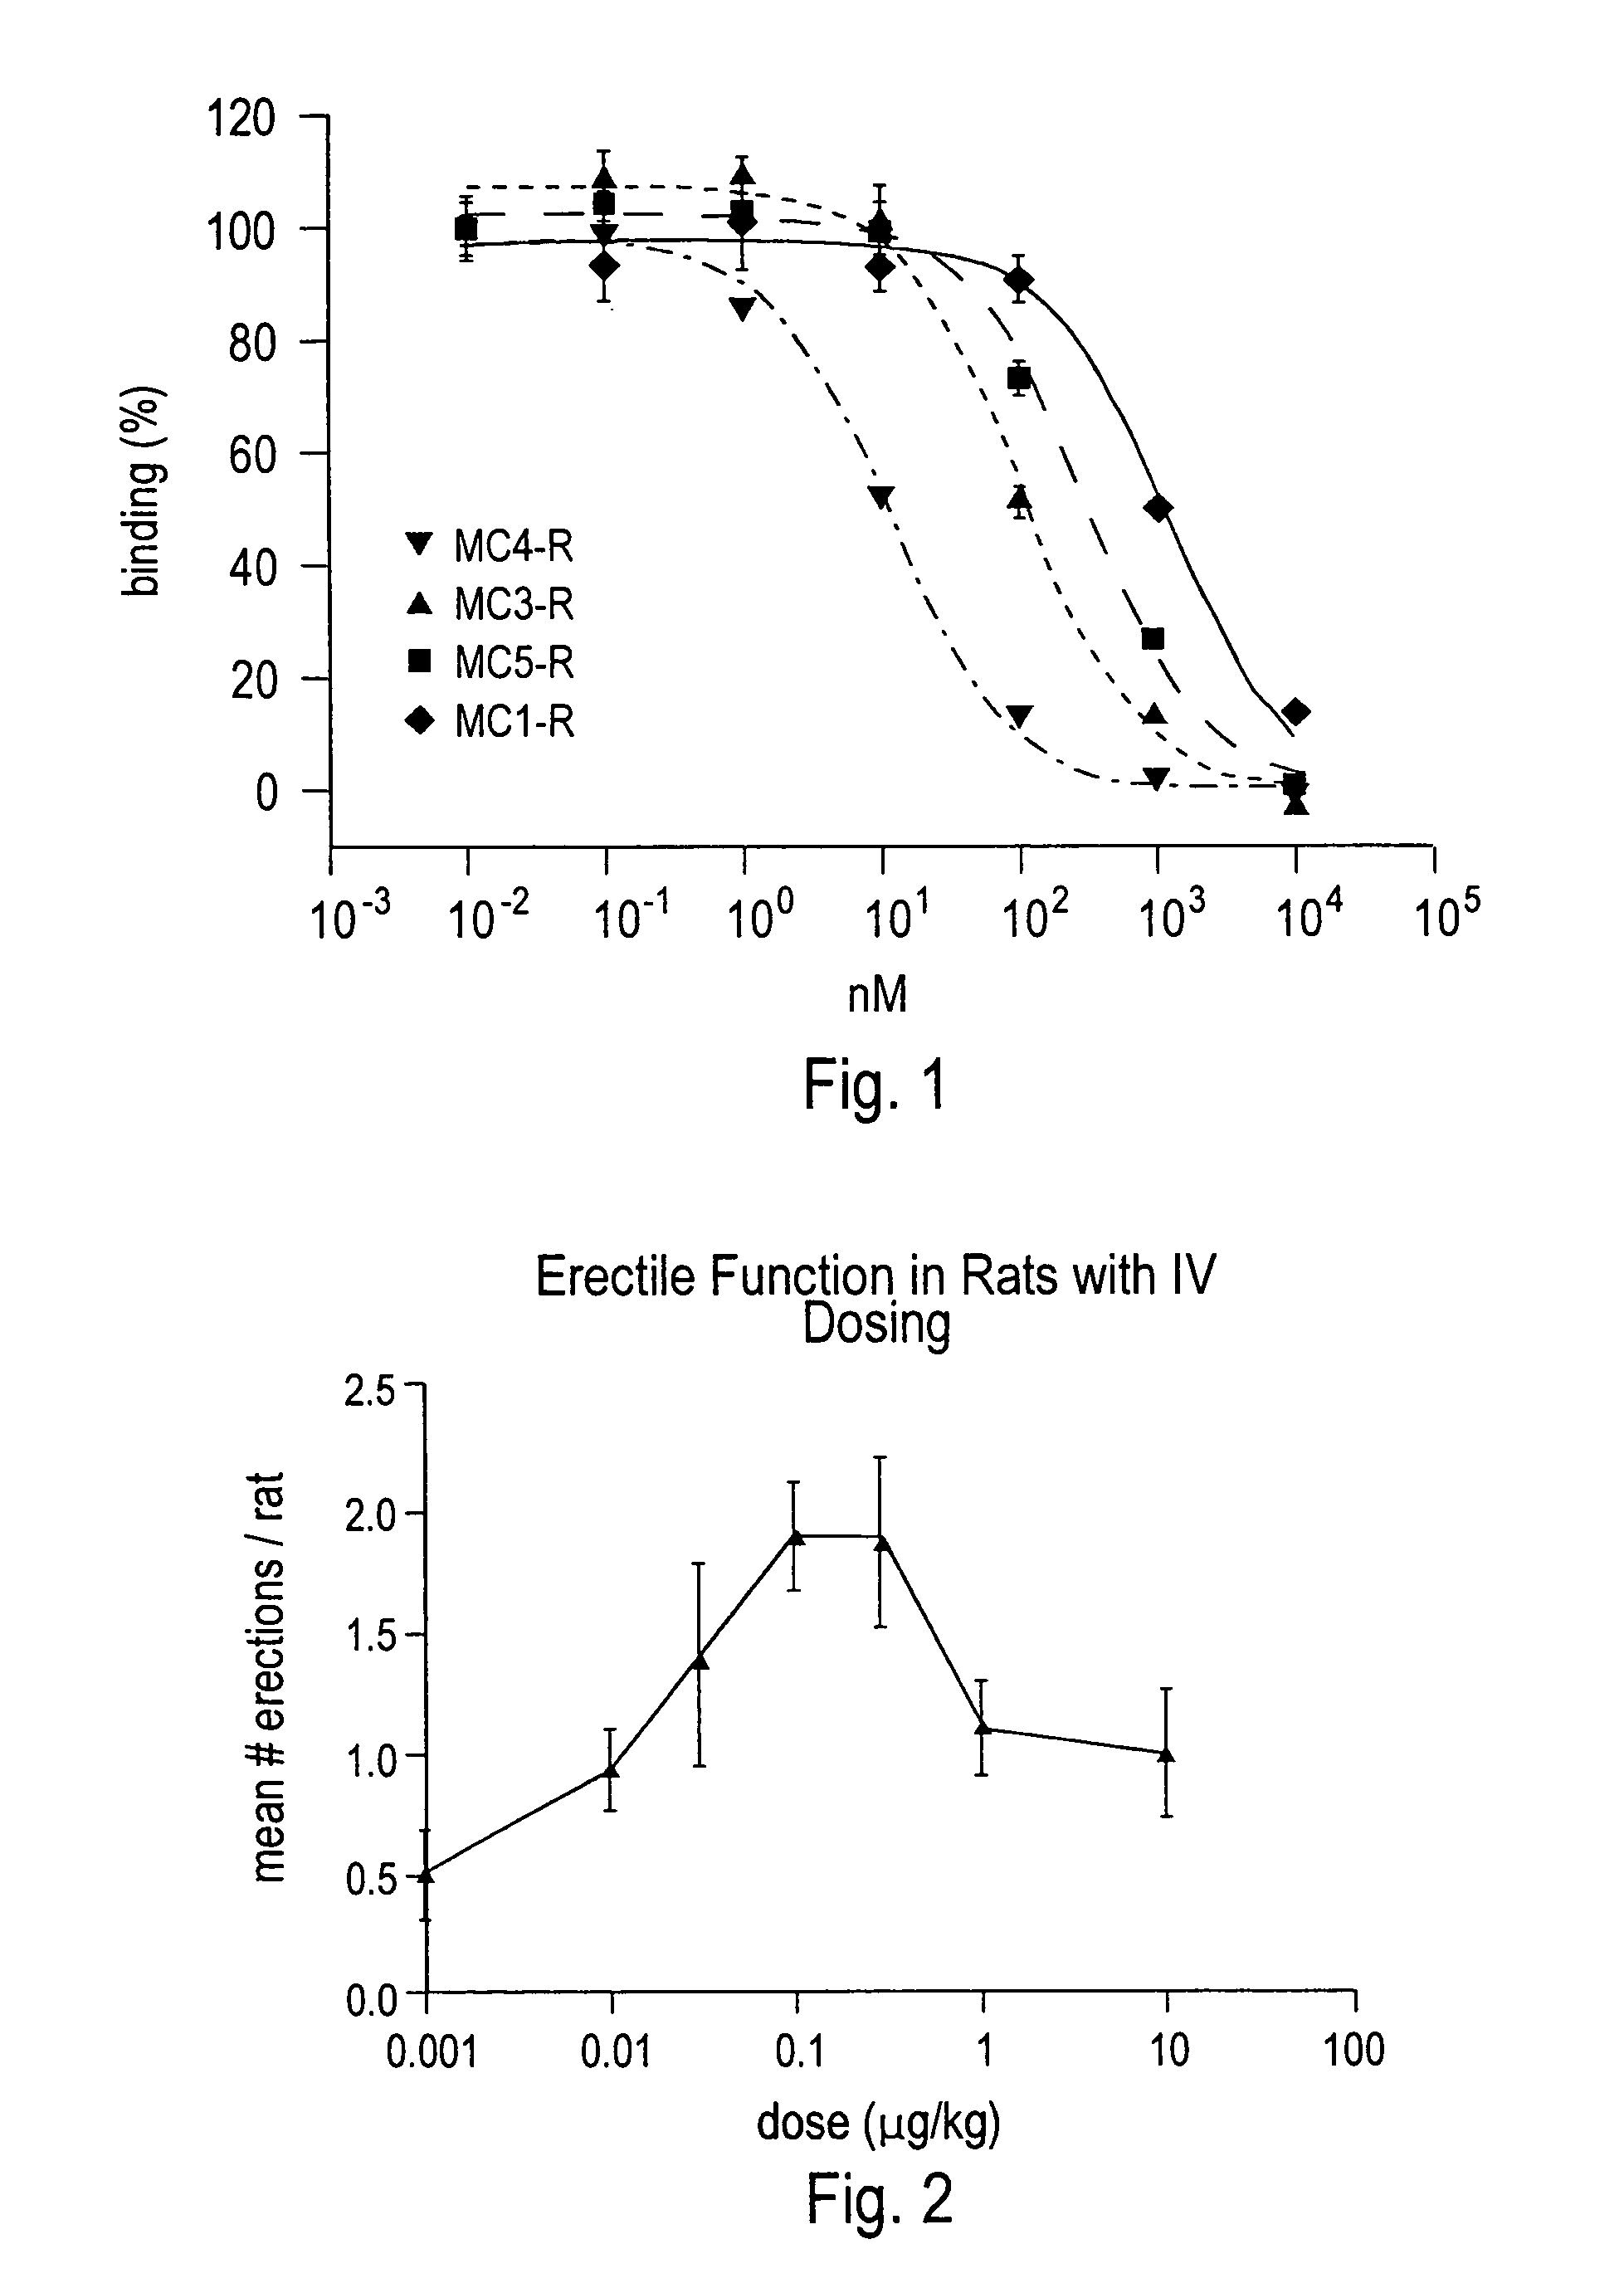 Linear and cyclic melanocortin receptor-specific peptides